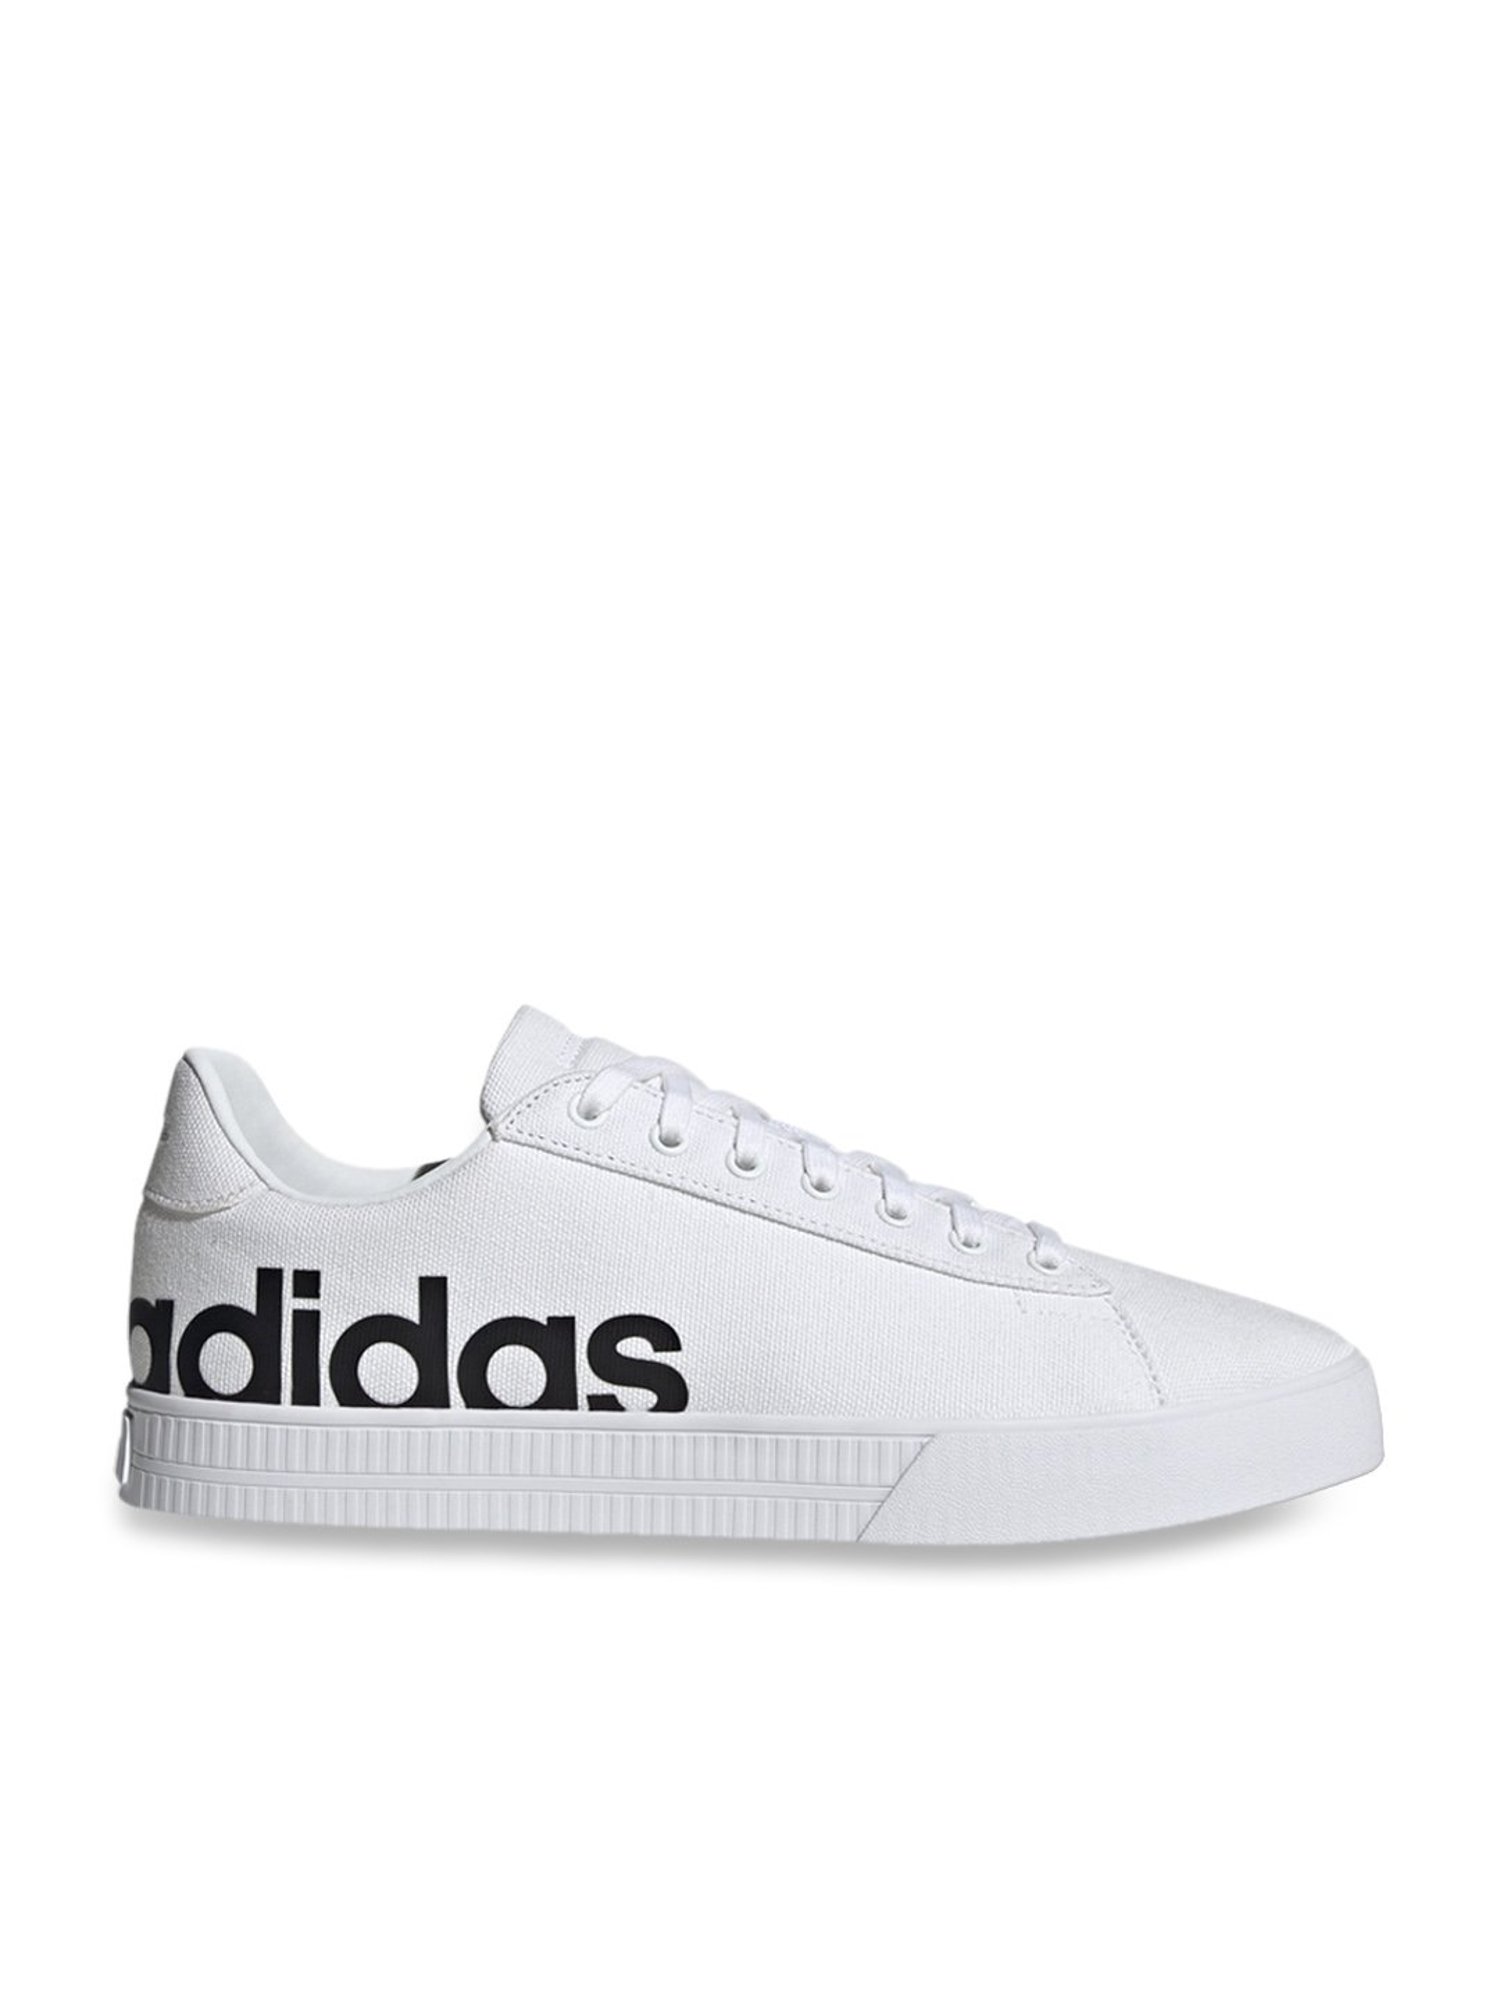 Buy Adidas Men's DAILY 3.0 LTS White Casual Sneakers for Men Best Price @ Tata CLiQ